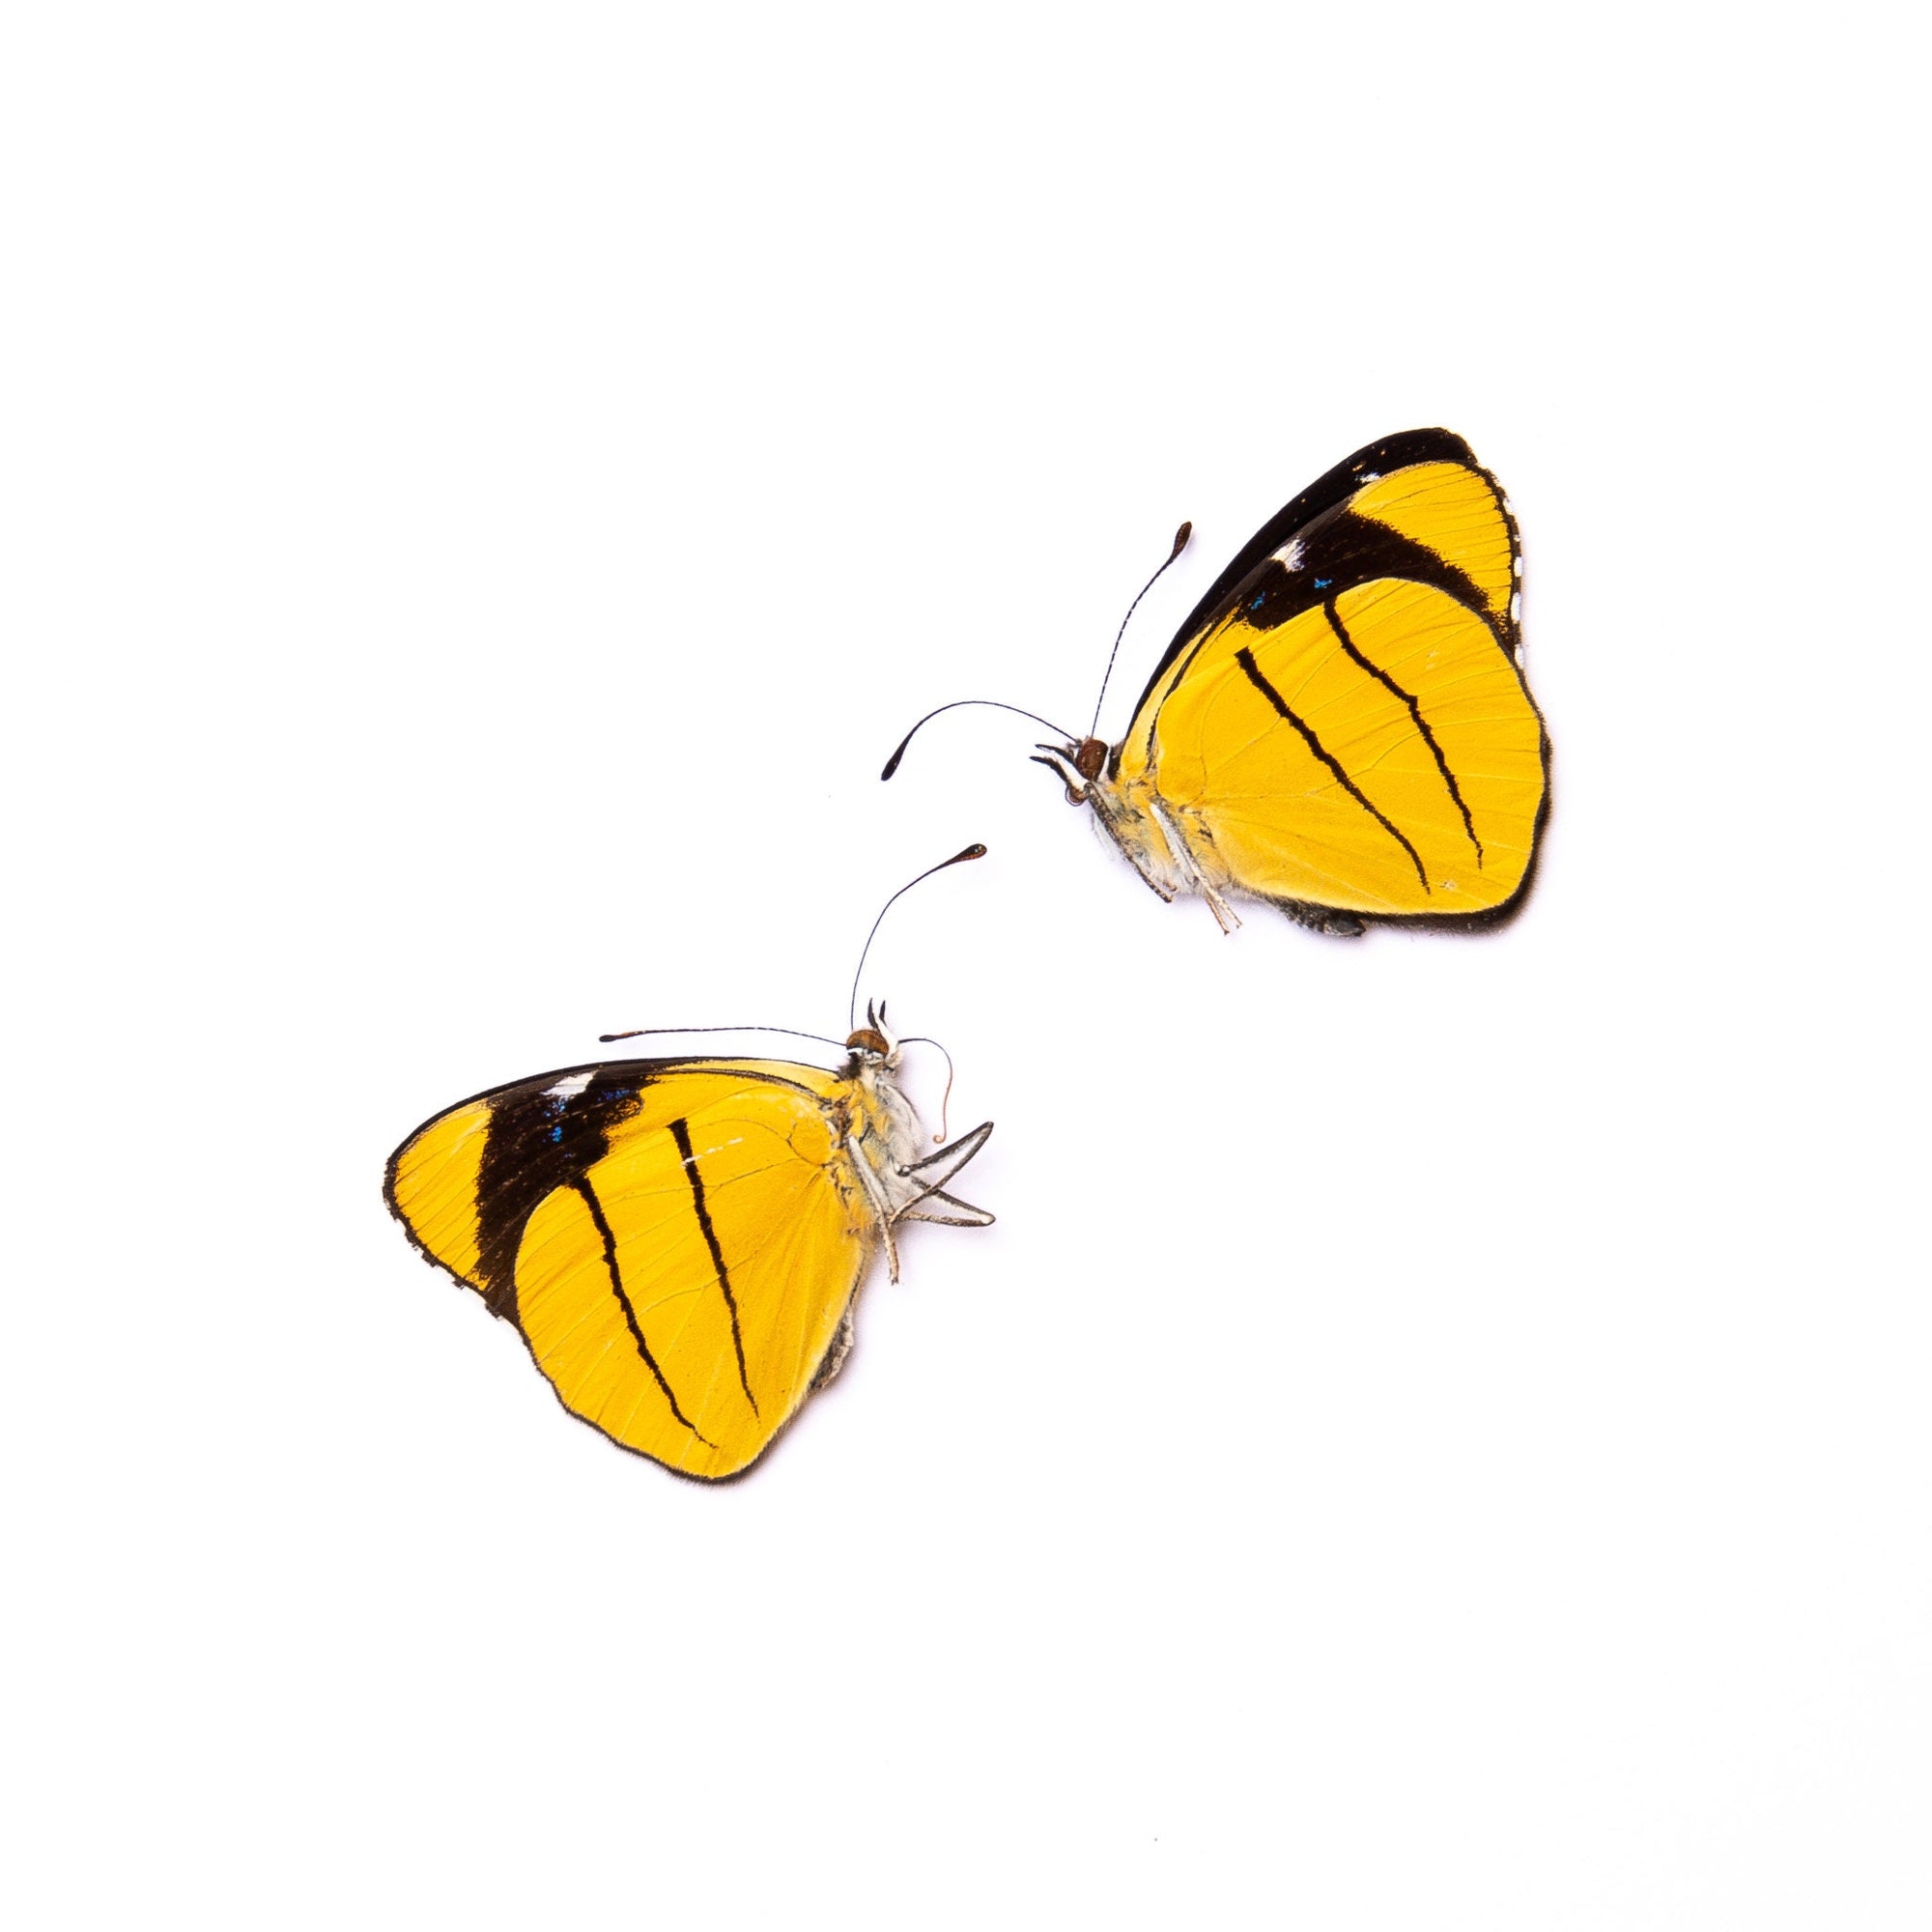 TWO (2) Perisama xanthica | A1 Real Dry-Preserved Butterflies | Unmounted Entomology Taxidermy Specimens